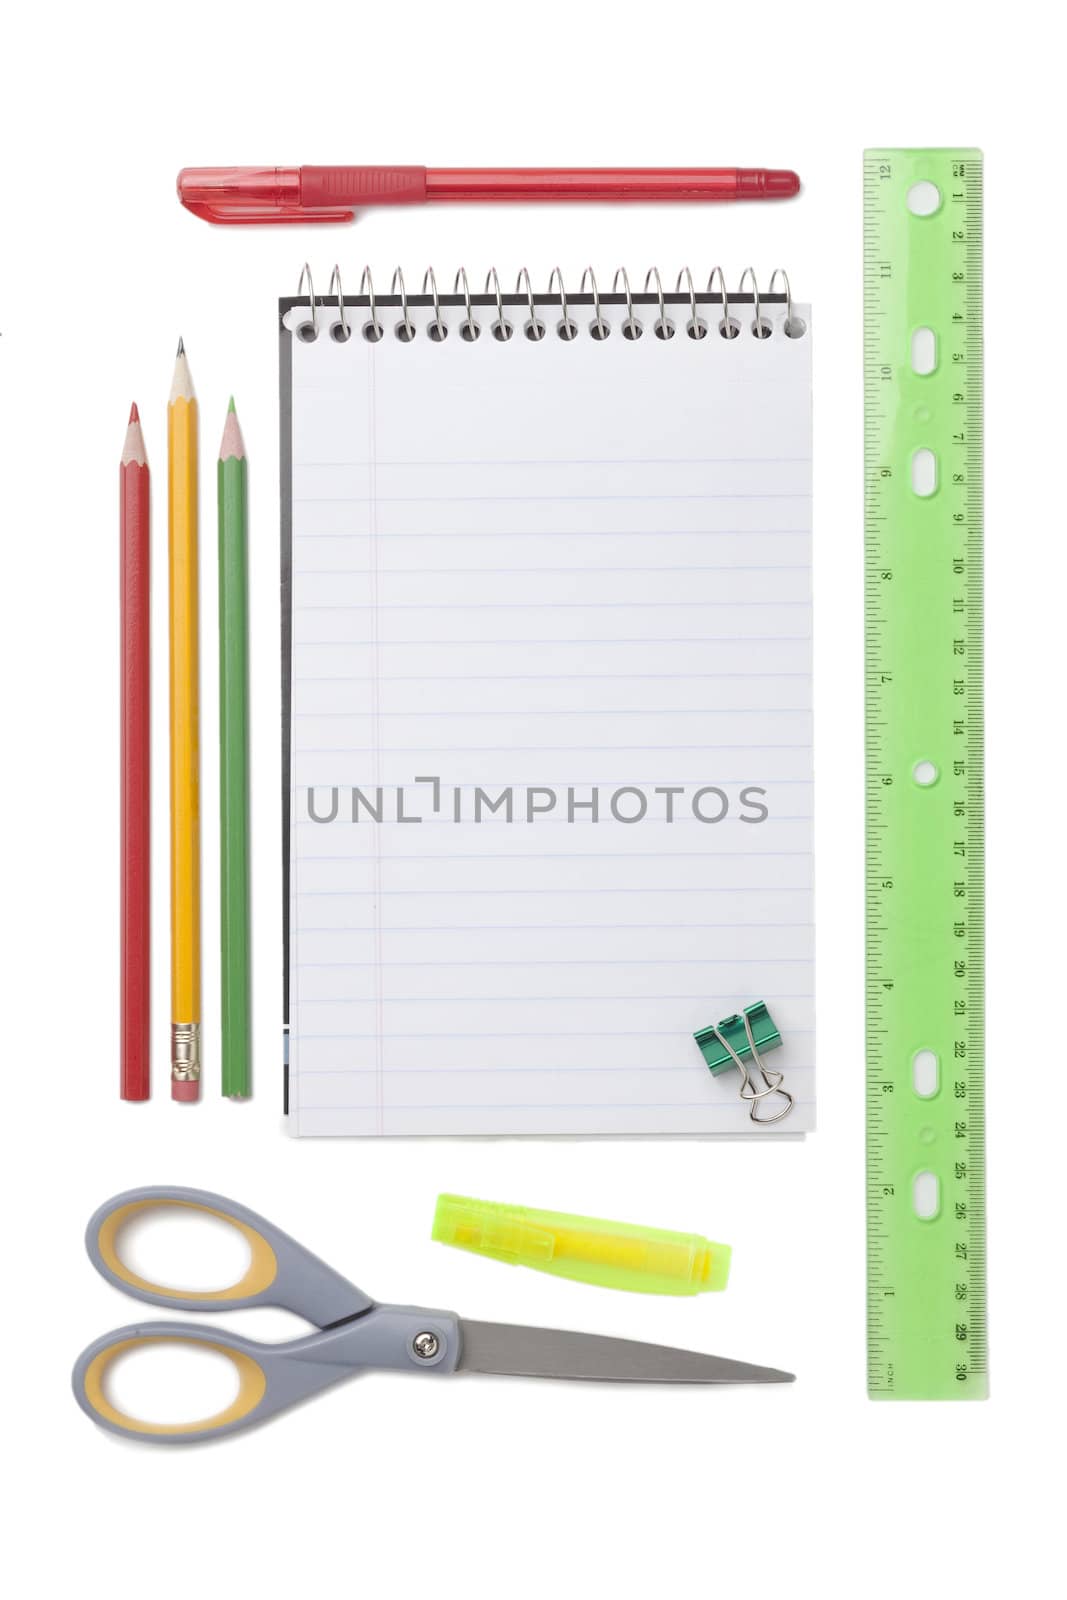 Close up image of school supplies against white background